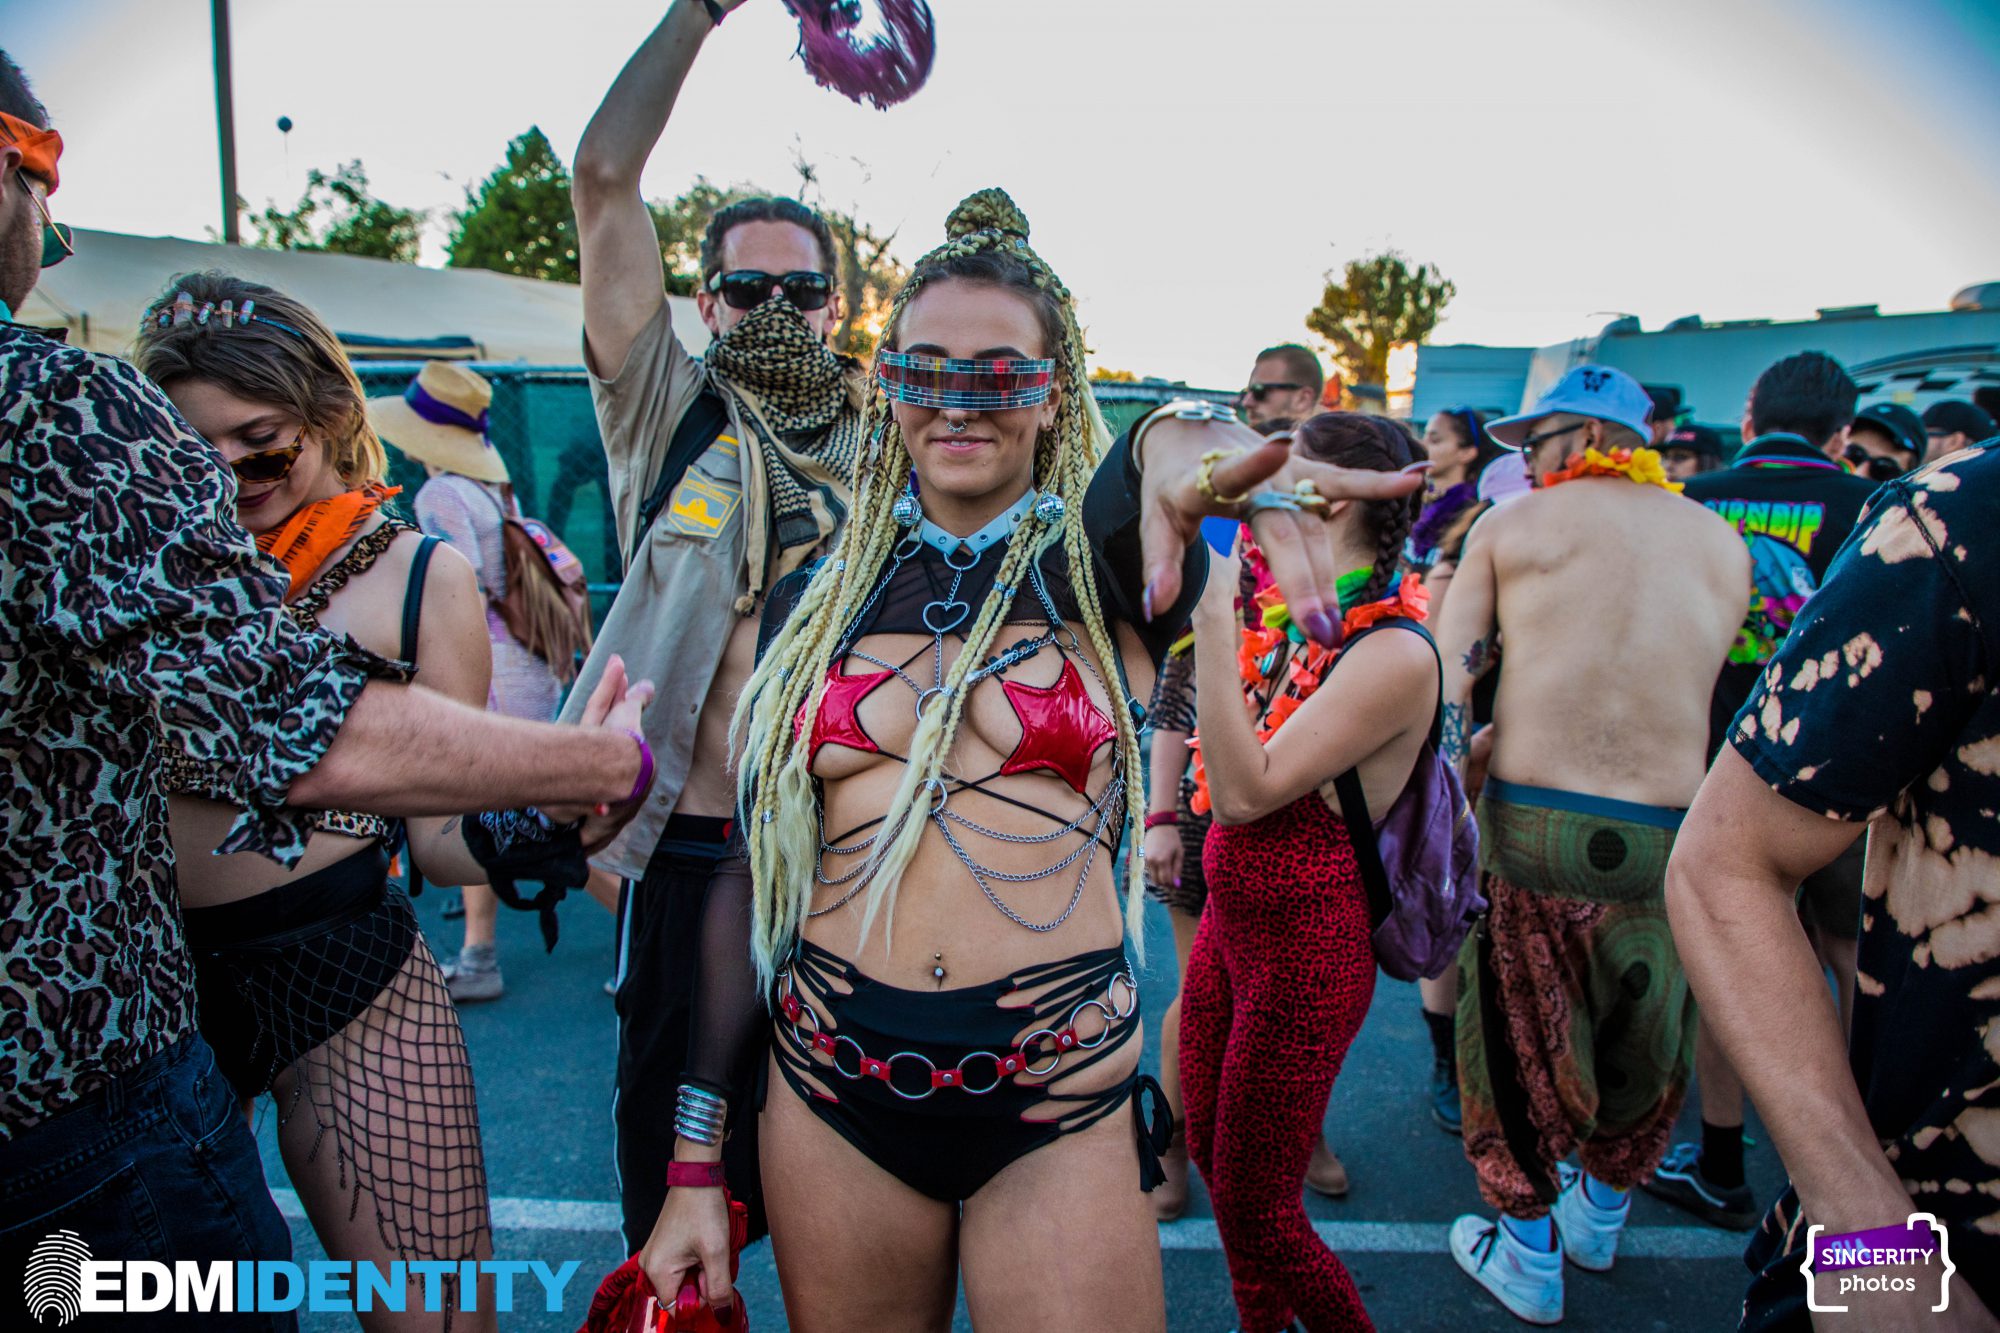 Fashionista at Dirtybird Campout West